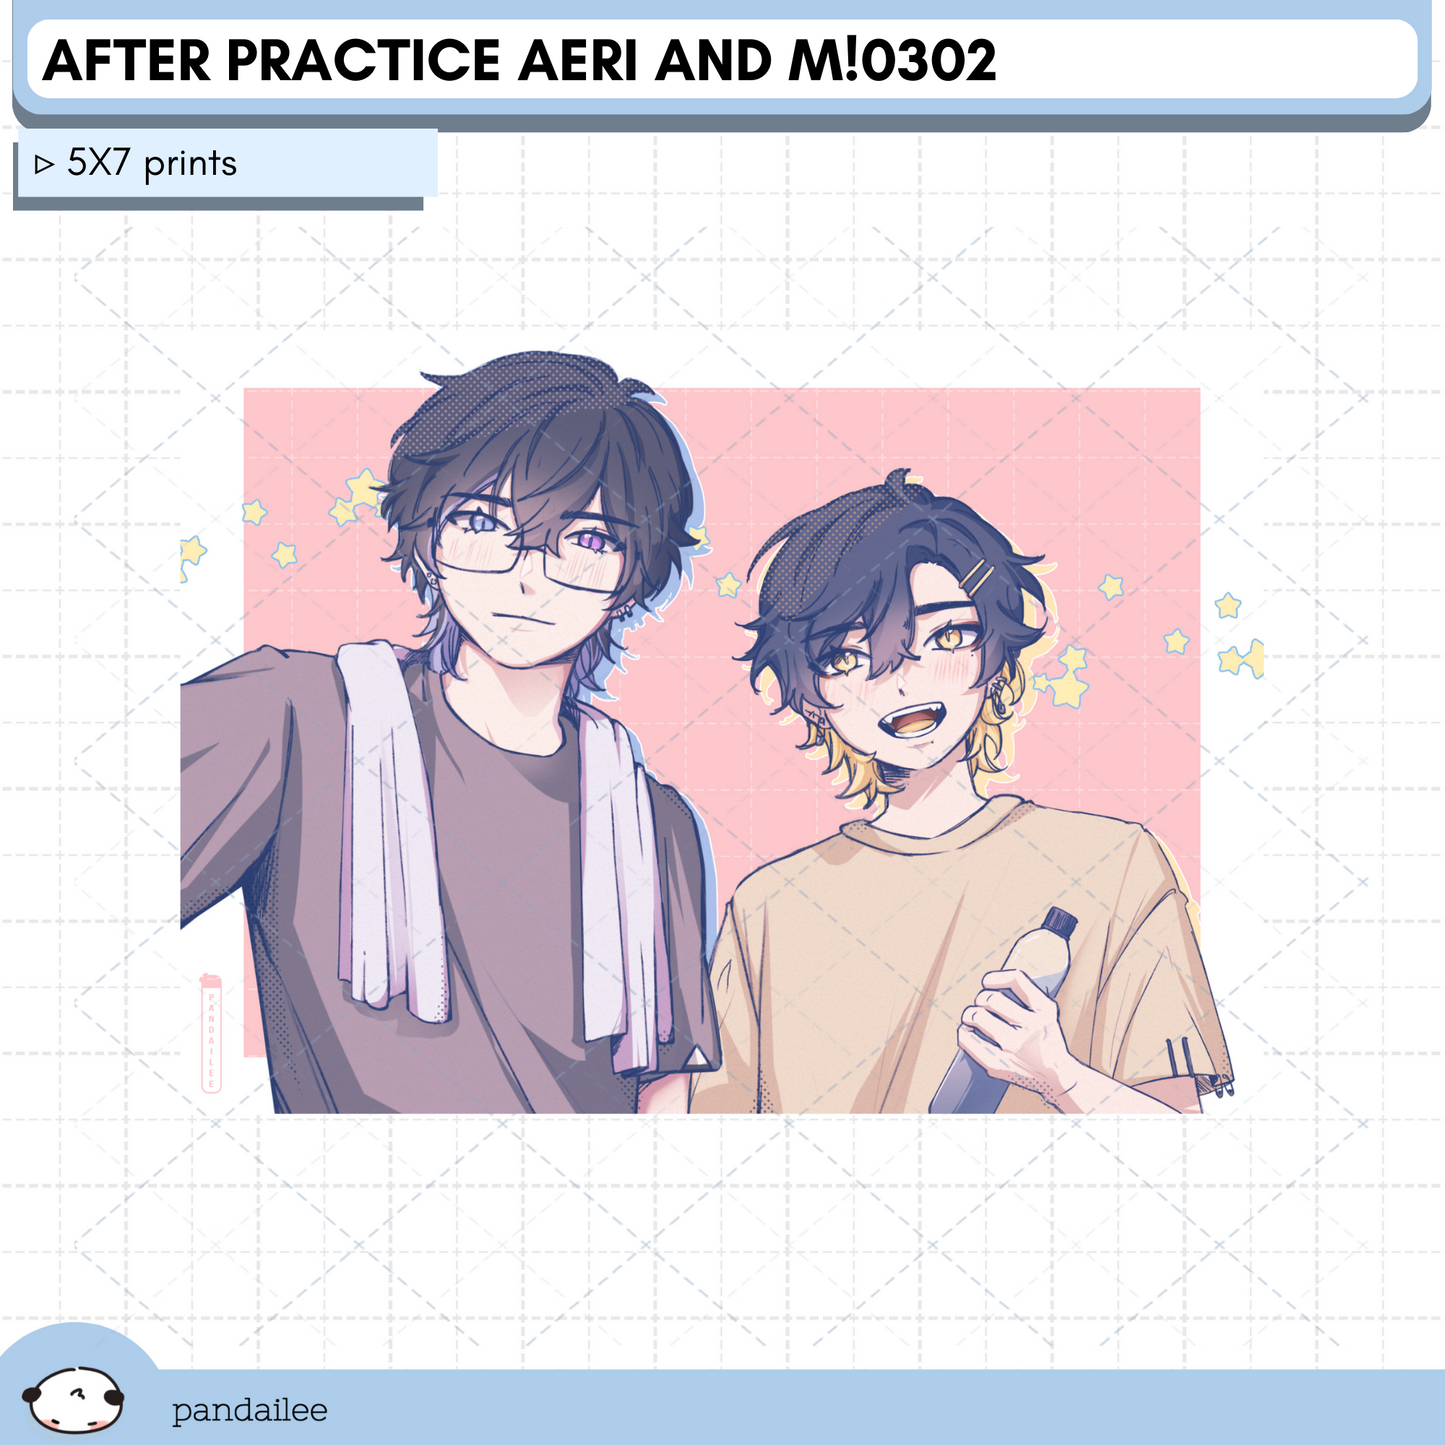 Prints ◦ Small┊After Practice Aeri & M!0302